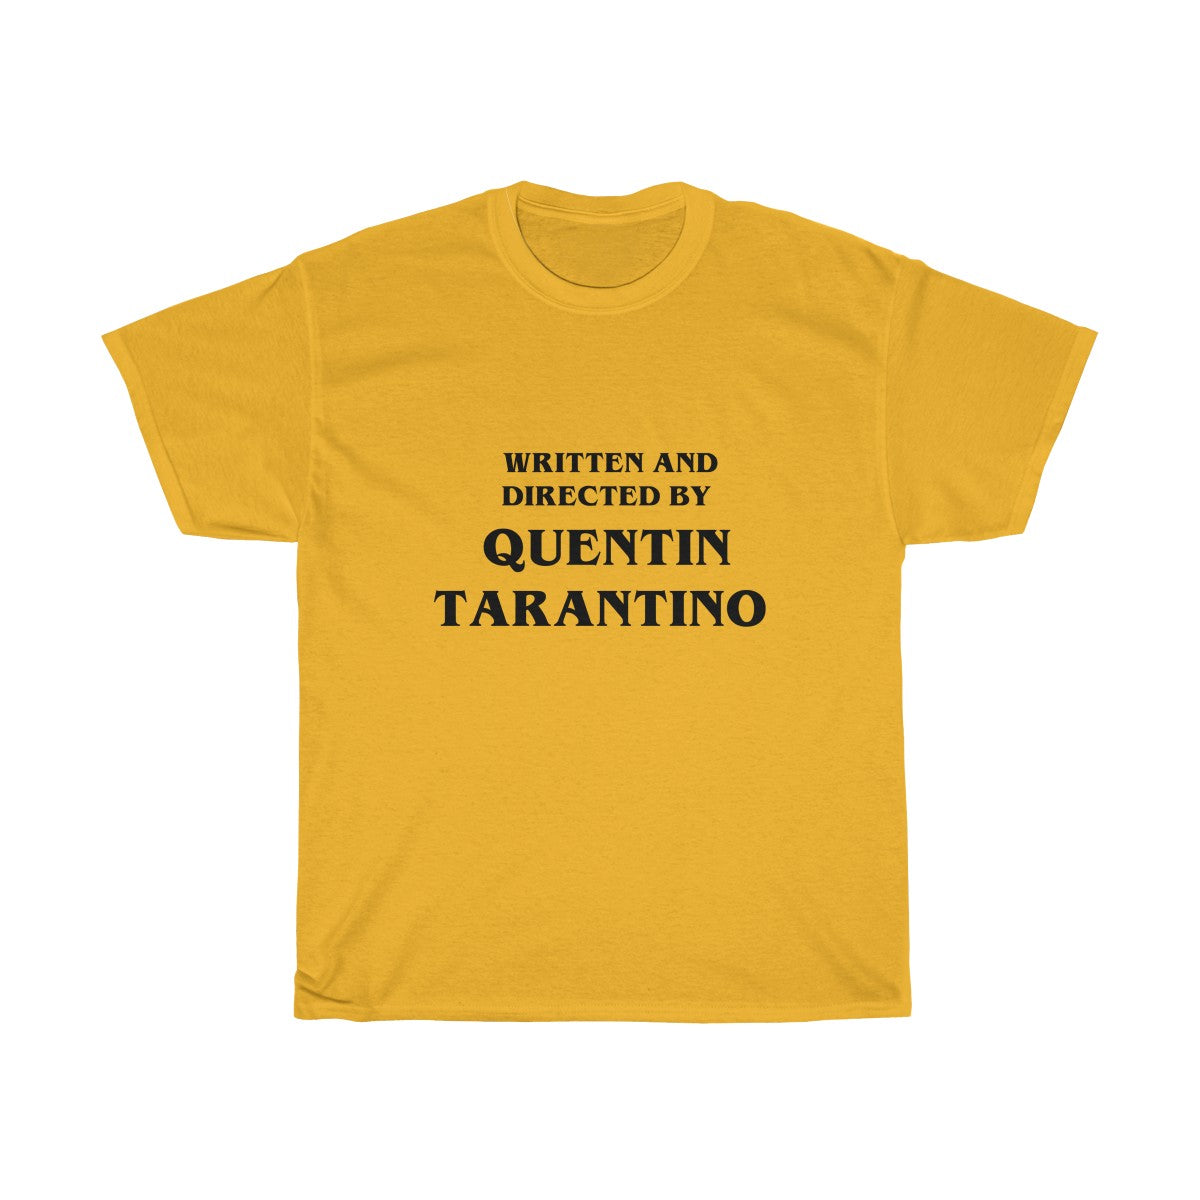 Vintage Men's Written and Directed by Quentin Tarantino T-Shirt